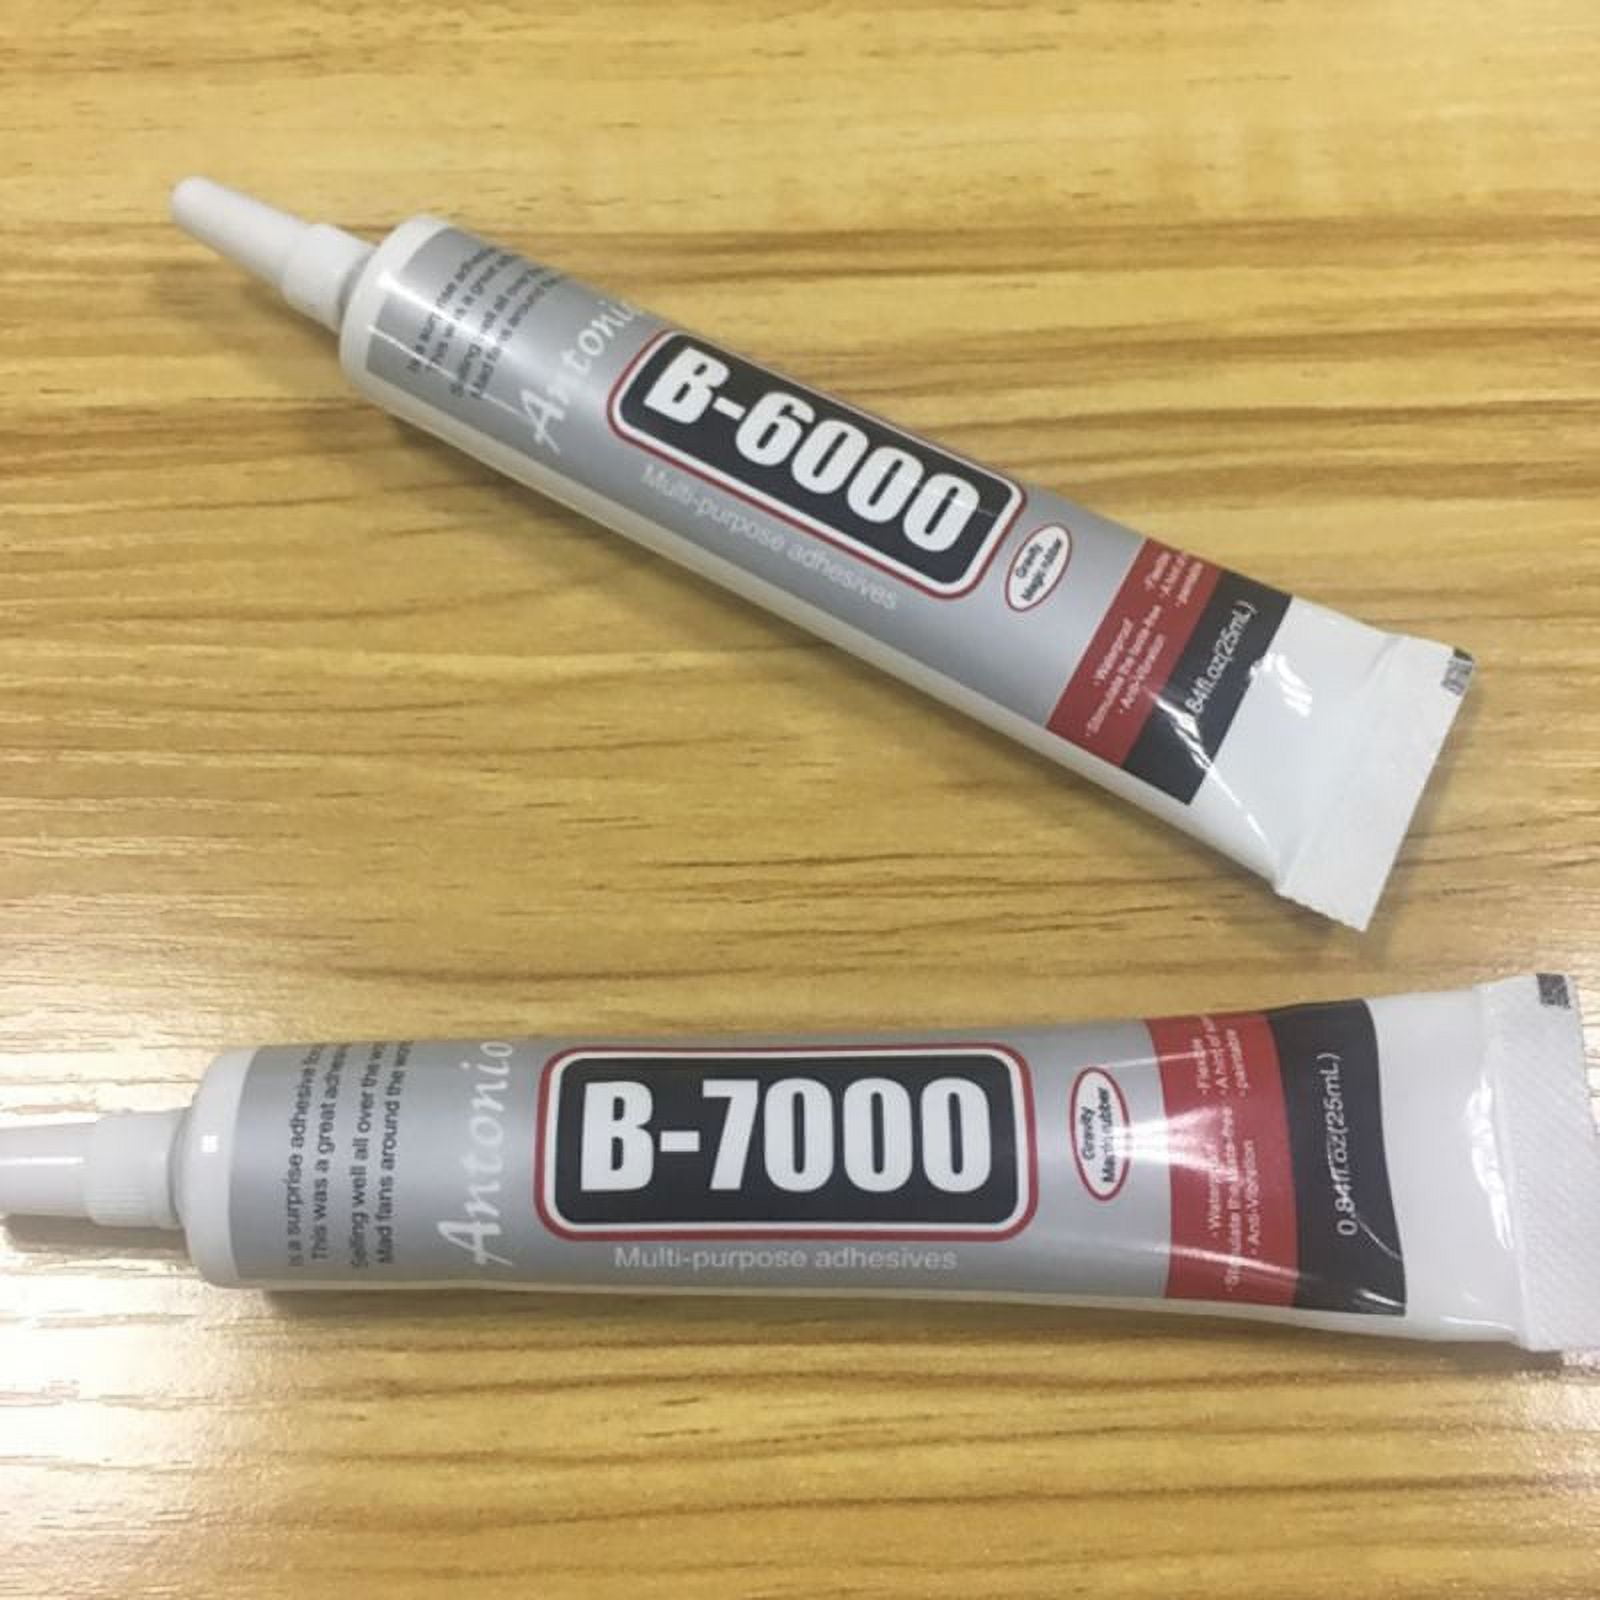 Multi-Purpose B7000 Transparent Strong Super Glue Adhesive Suitable for DIY  LCD Screen Phone Case Glass Jewelry Watch Repair